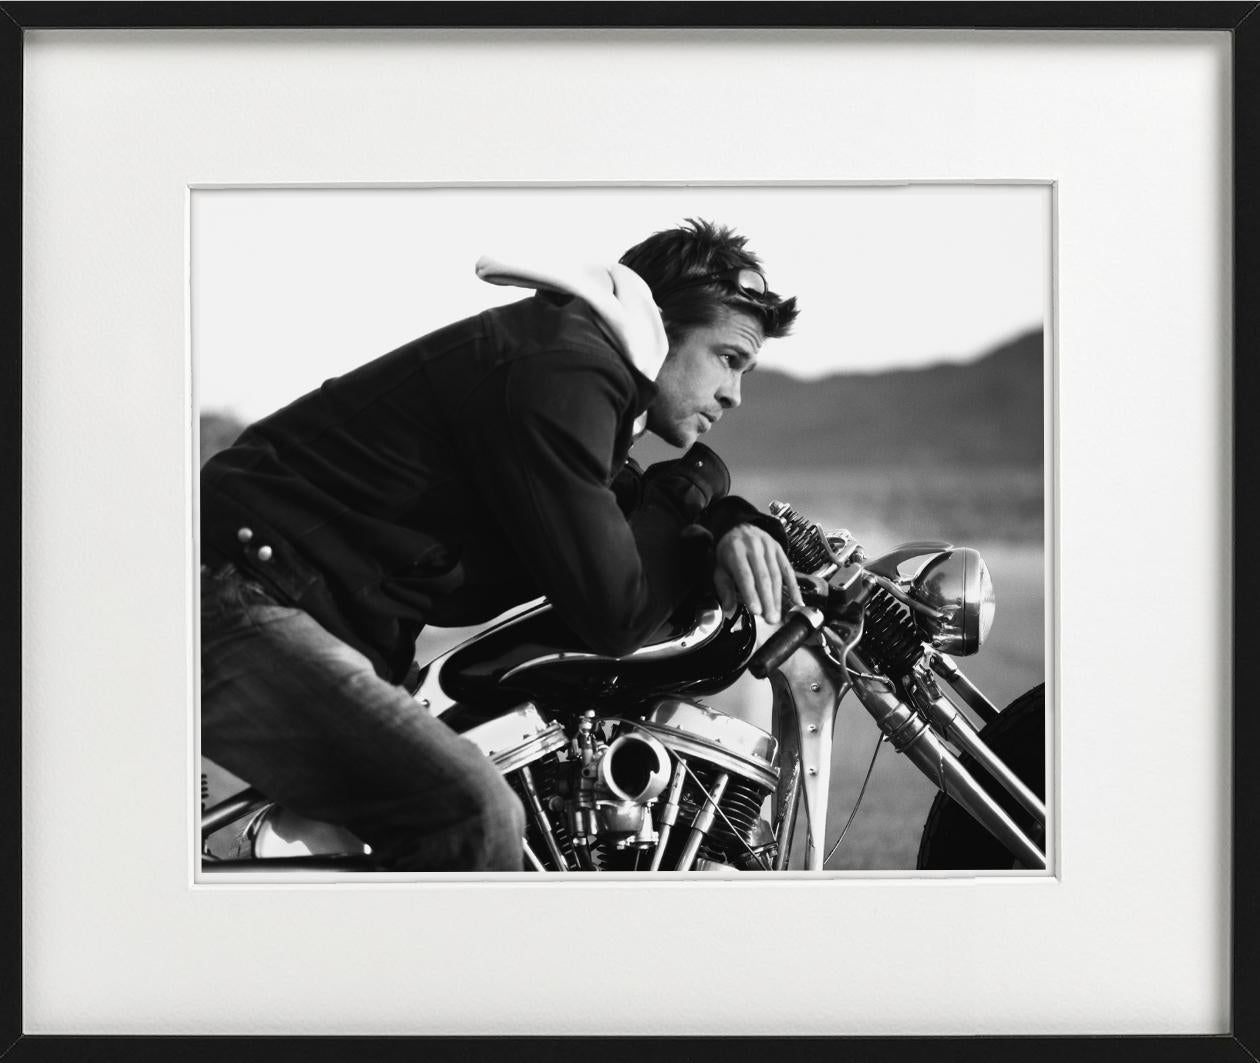 Brad Pitt - b&w portrait of the actor on a motorcycle, fine art photography 2005 - Photograph by Timothy White